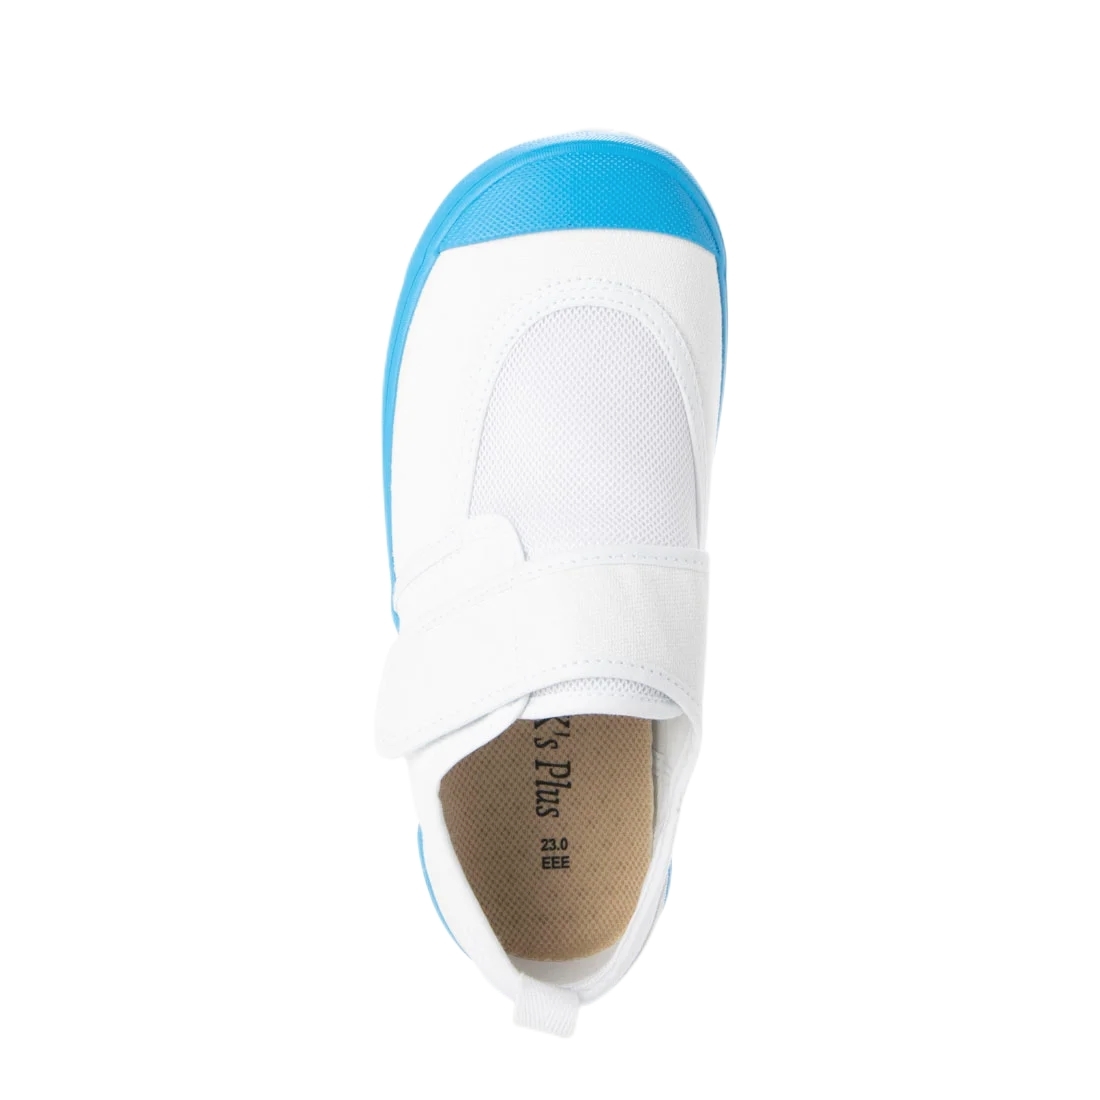 * new goods *[23999m_L.BLUE_15.0] indoor shoes on shoes physical training pavilion shoes school shoes interior sport shoes commuting to kindergarten * going to school for ventilation & anti-bacterial deodorization processing 